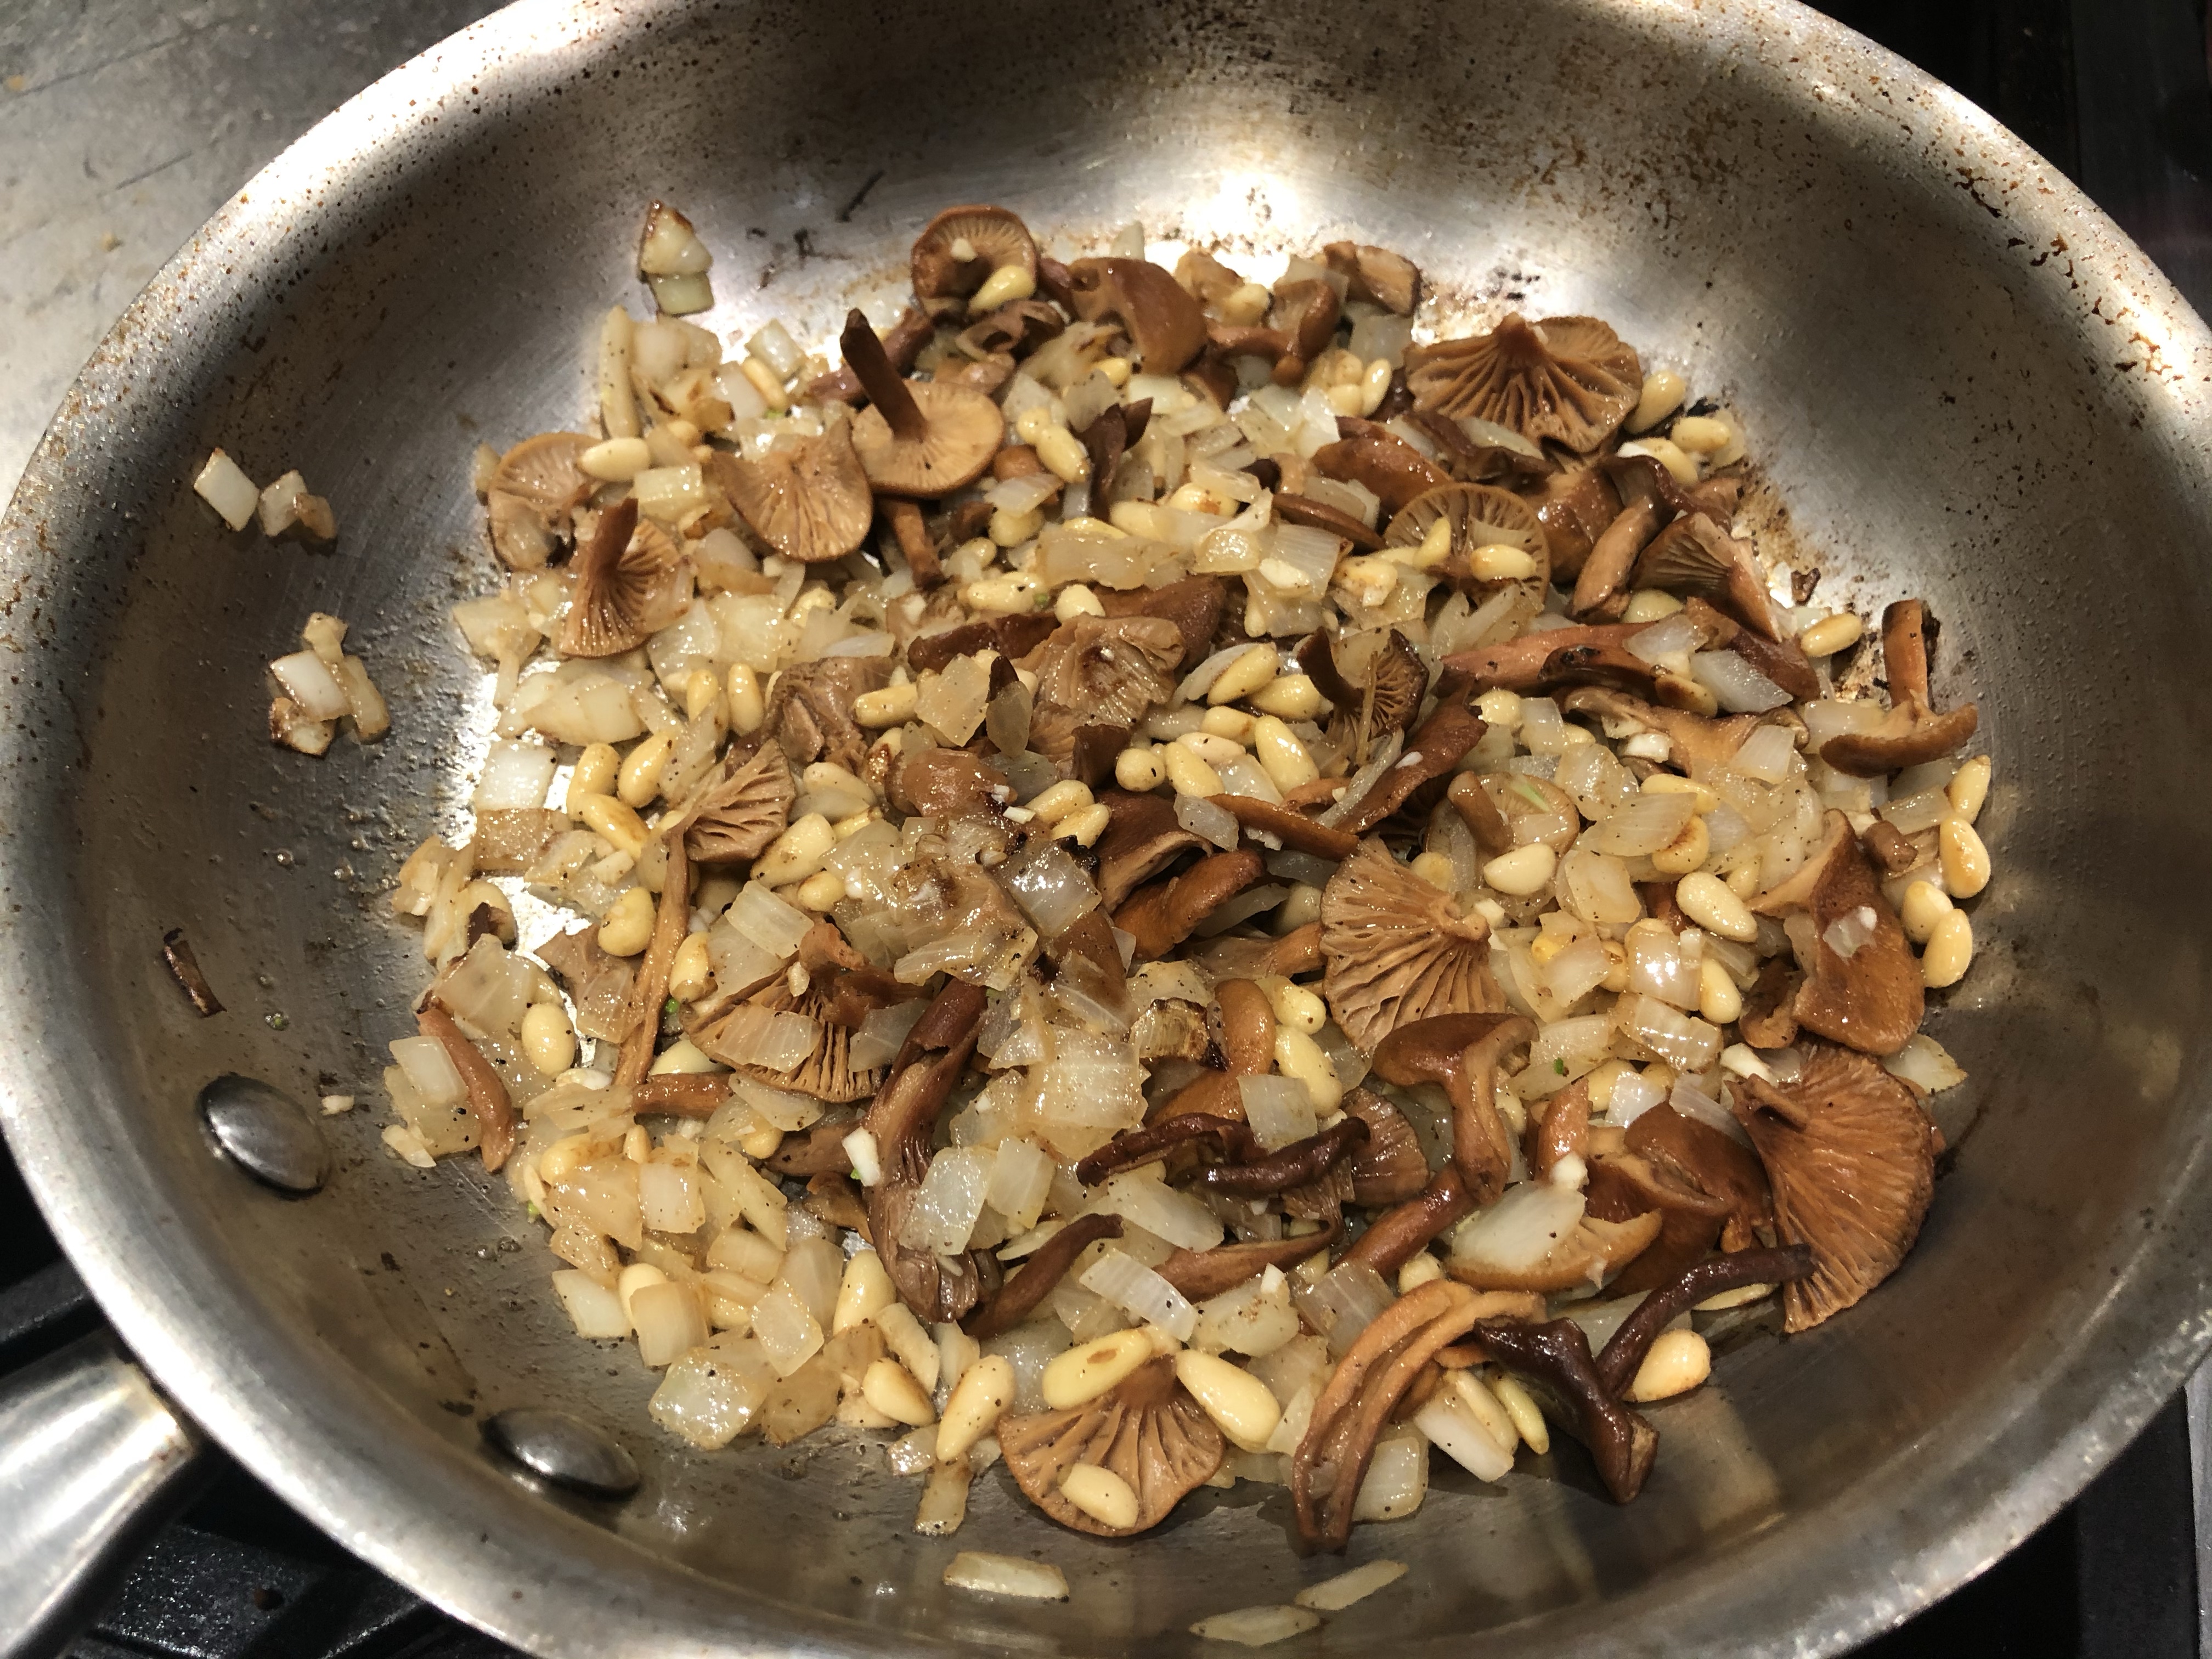 Mushrooms sautéd with onions, garlic, and pine nuts. Ready to add rice.